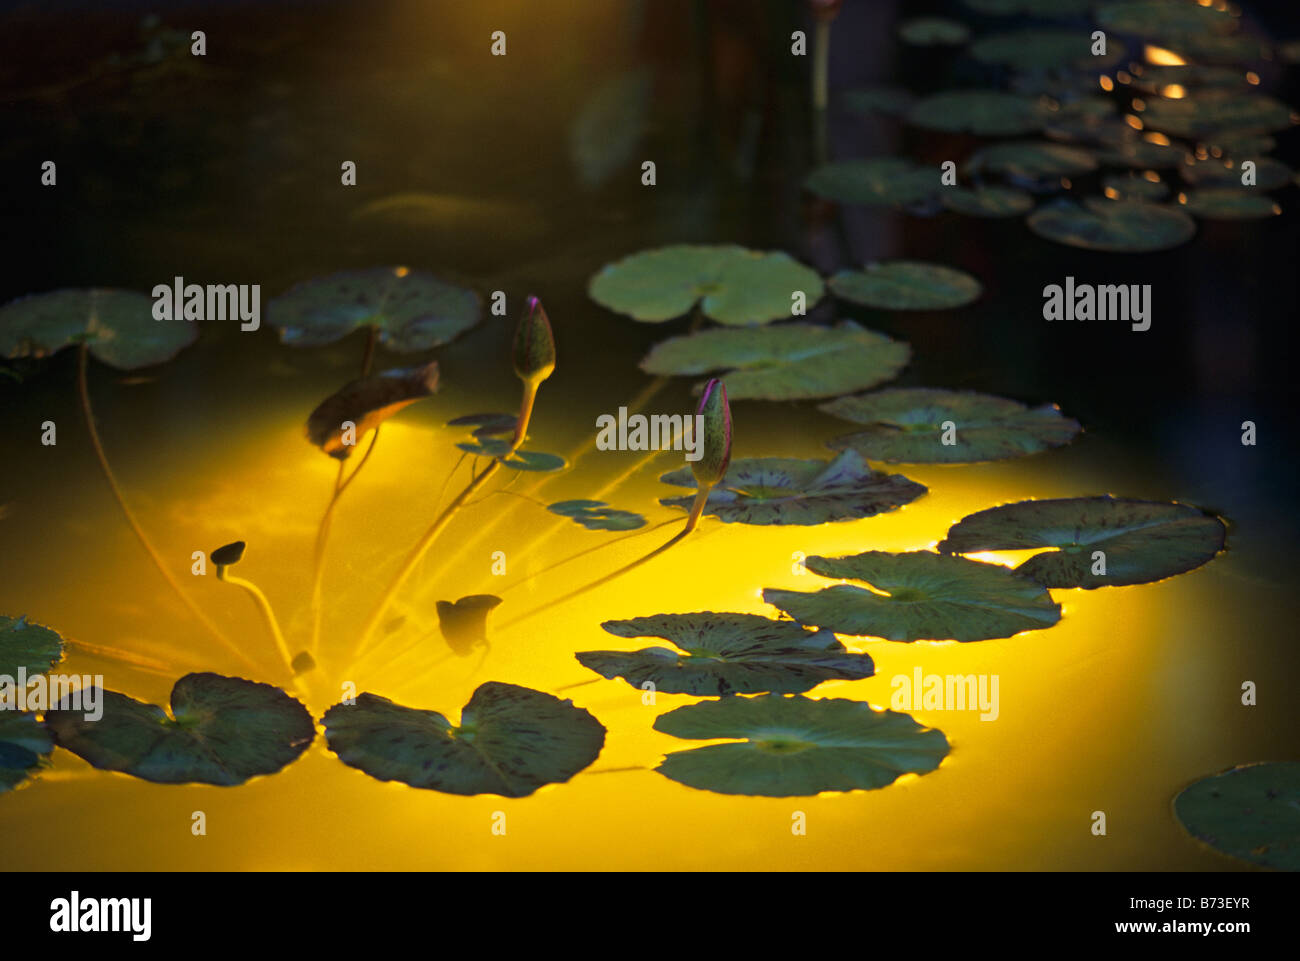 LIT FROM BELOW WITH FIBER OPTICS, WATER LILY PADS FLOAT IN SMALL GARDEN POND.  MINNESOTA; EVENING. Stock Photo